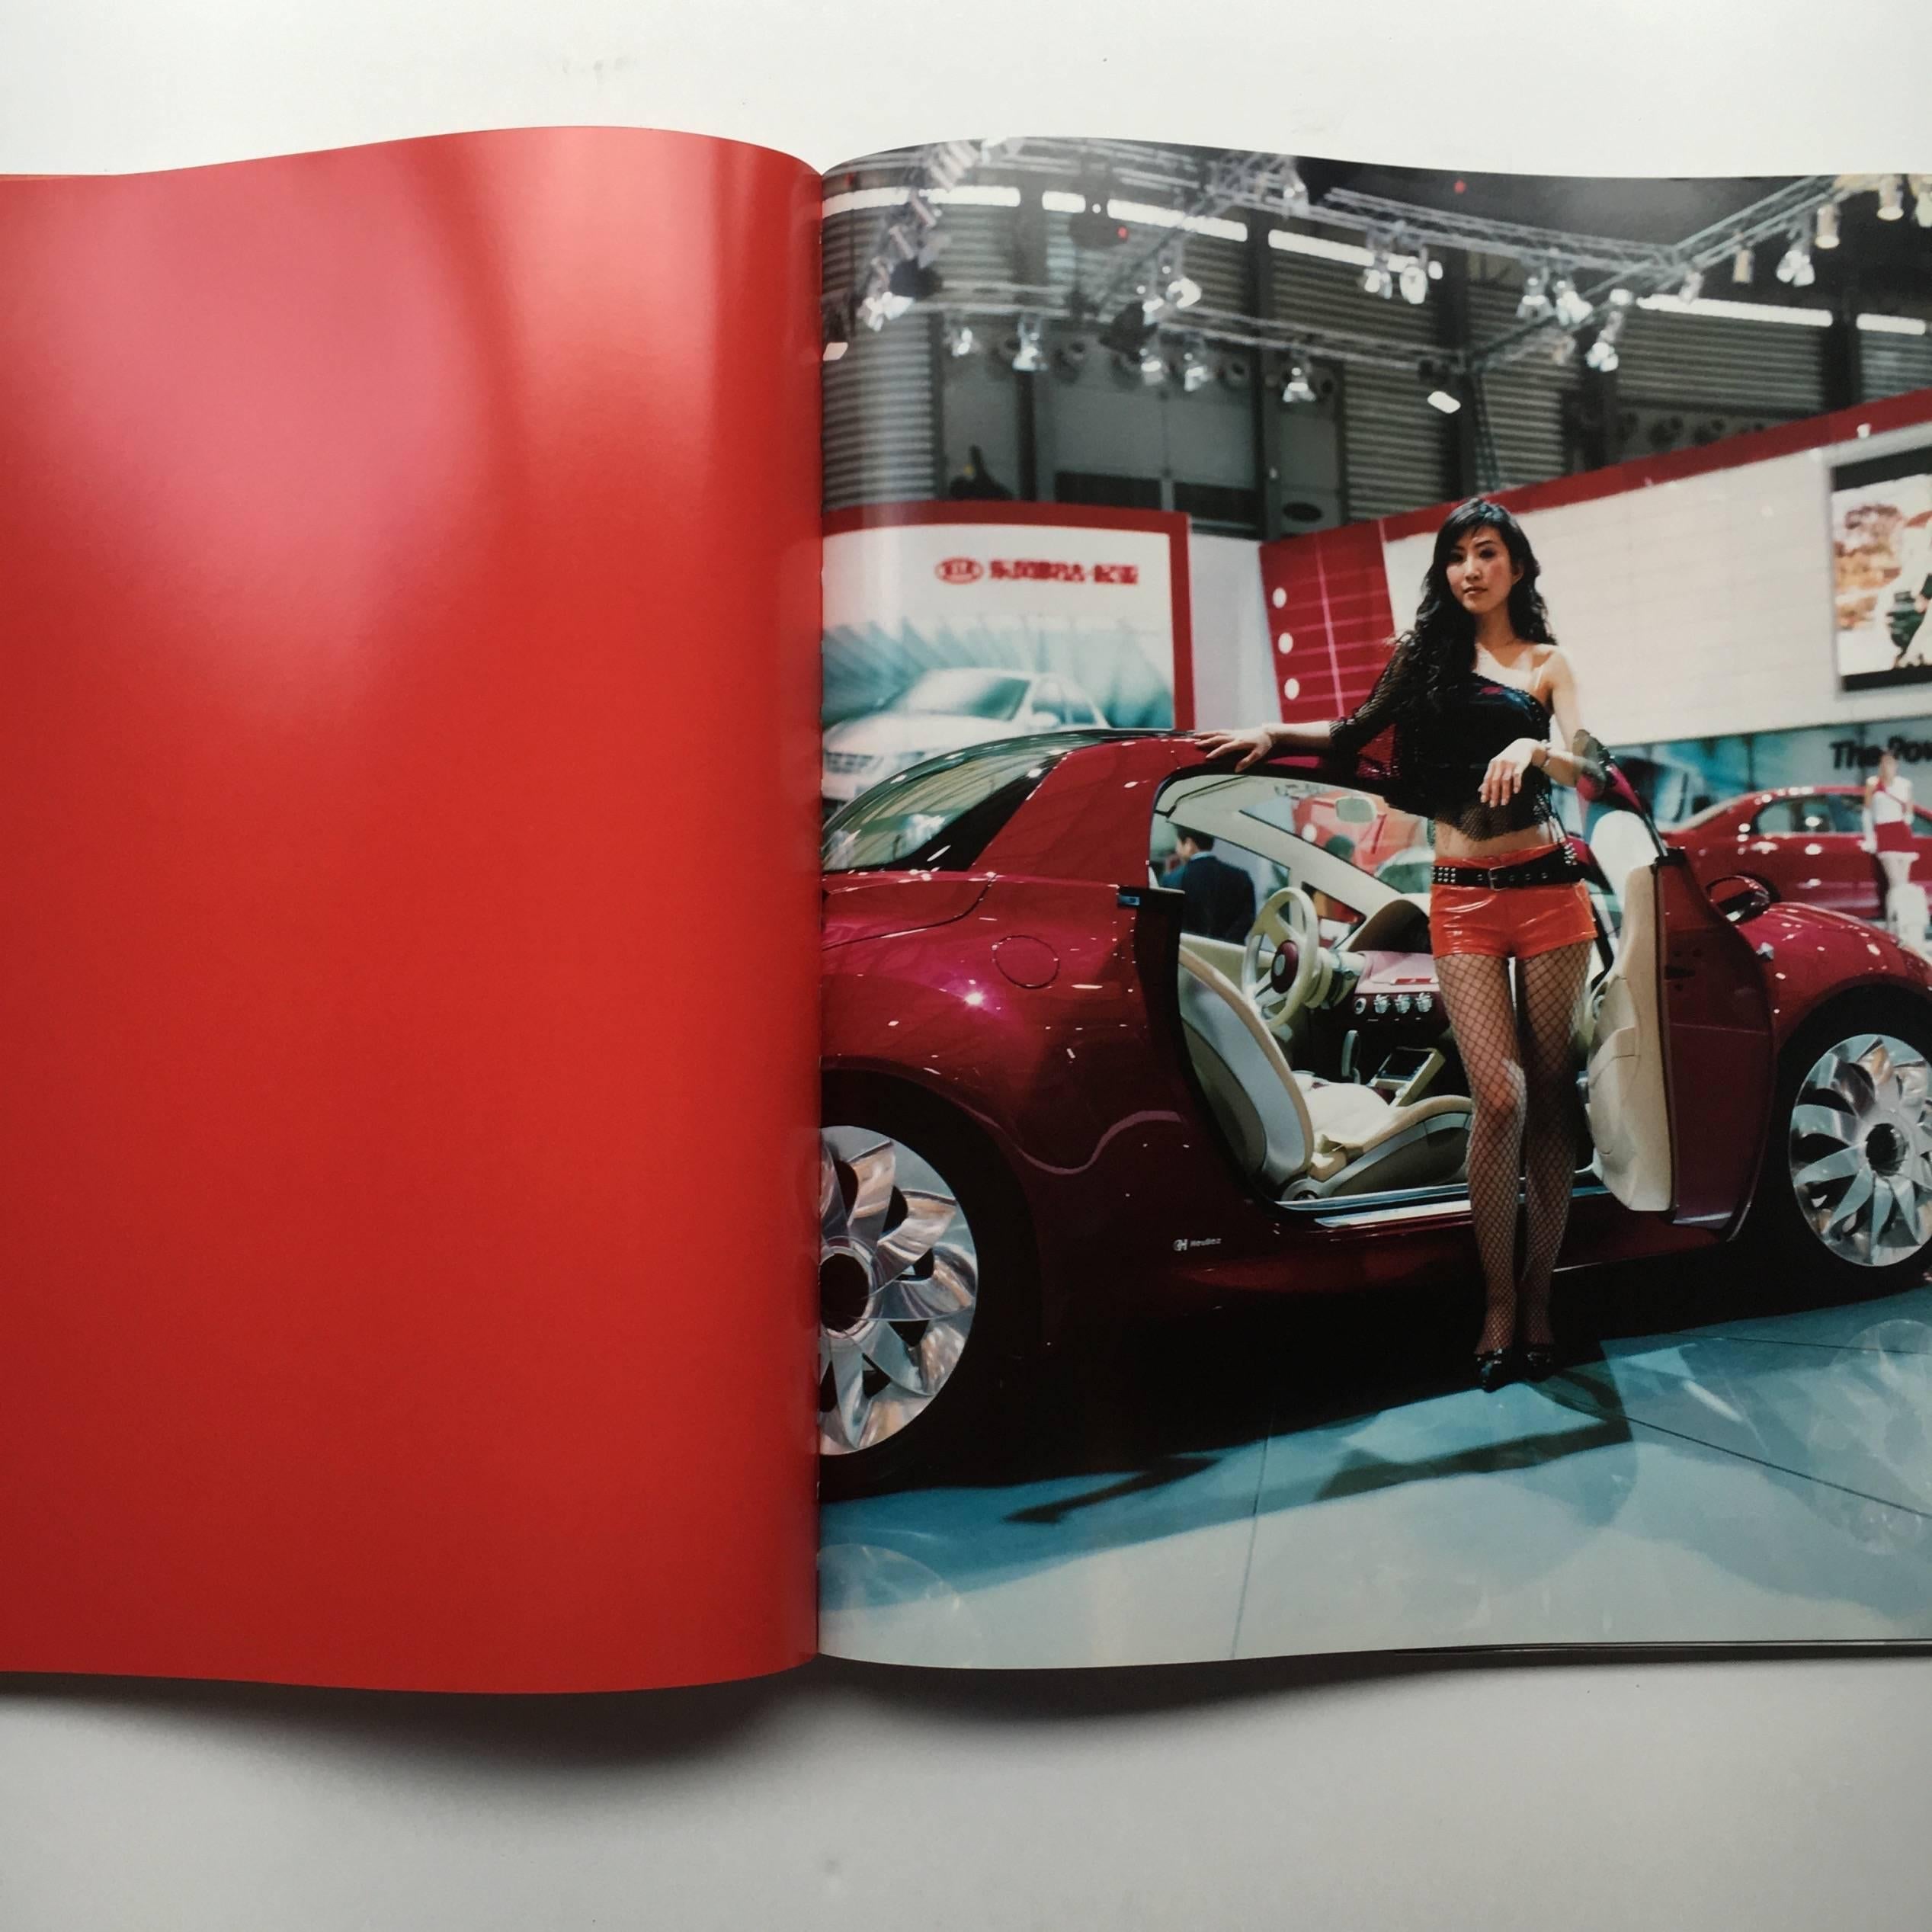 First edition, hardback in publisher’s original dust jacket, published by Aperture, 2009.

In this large, glossy publication, Jacqueline Hassink deconstructs the phenomena of the obligatory female model that stands beside a car at trade shows.